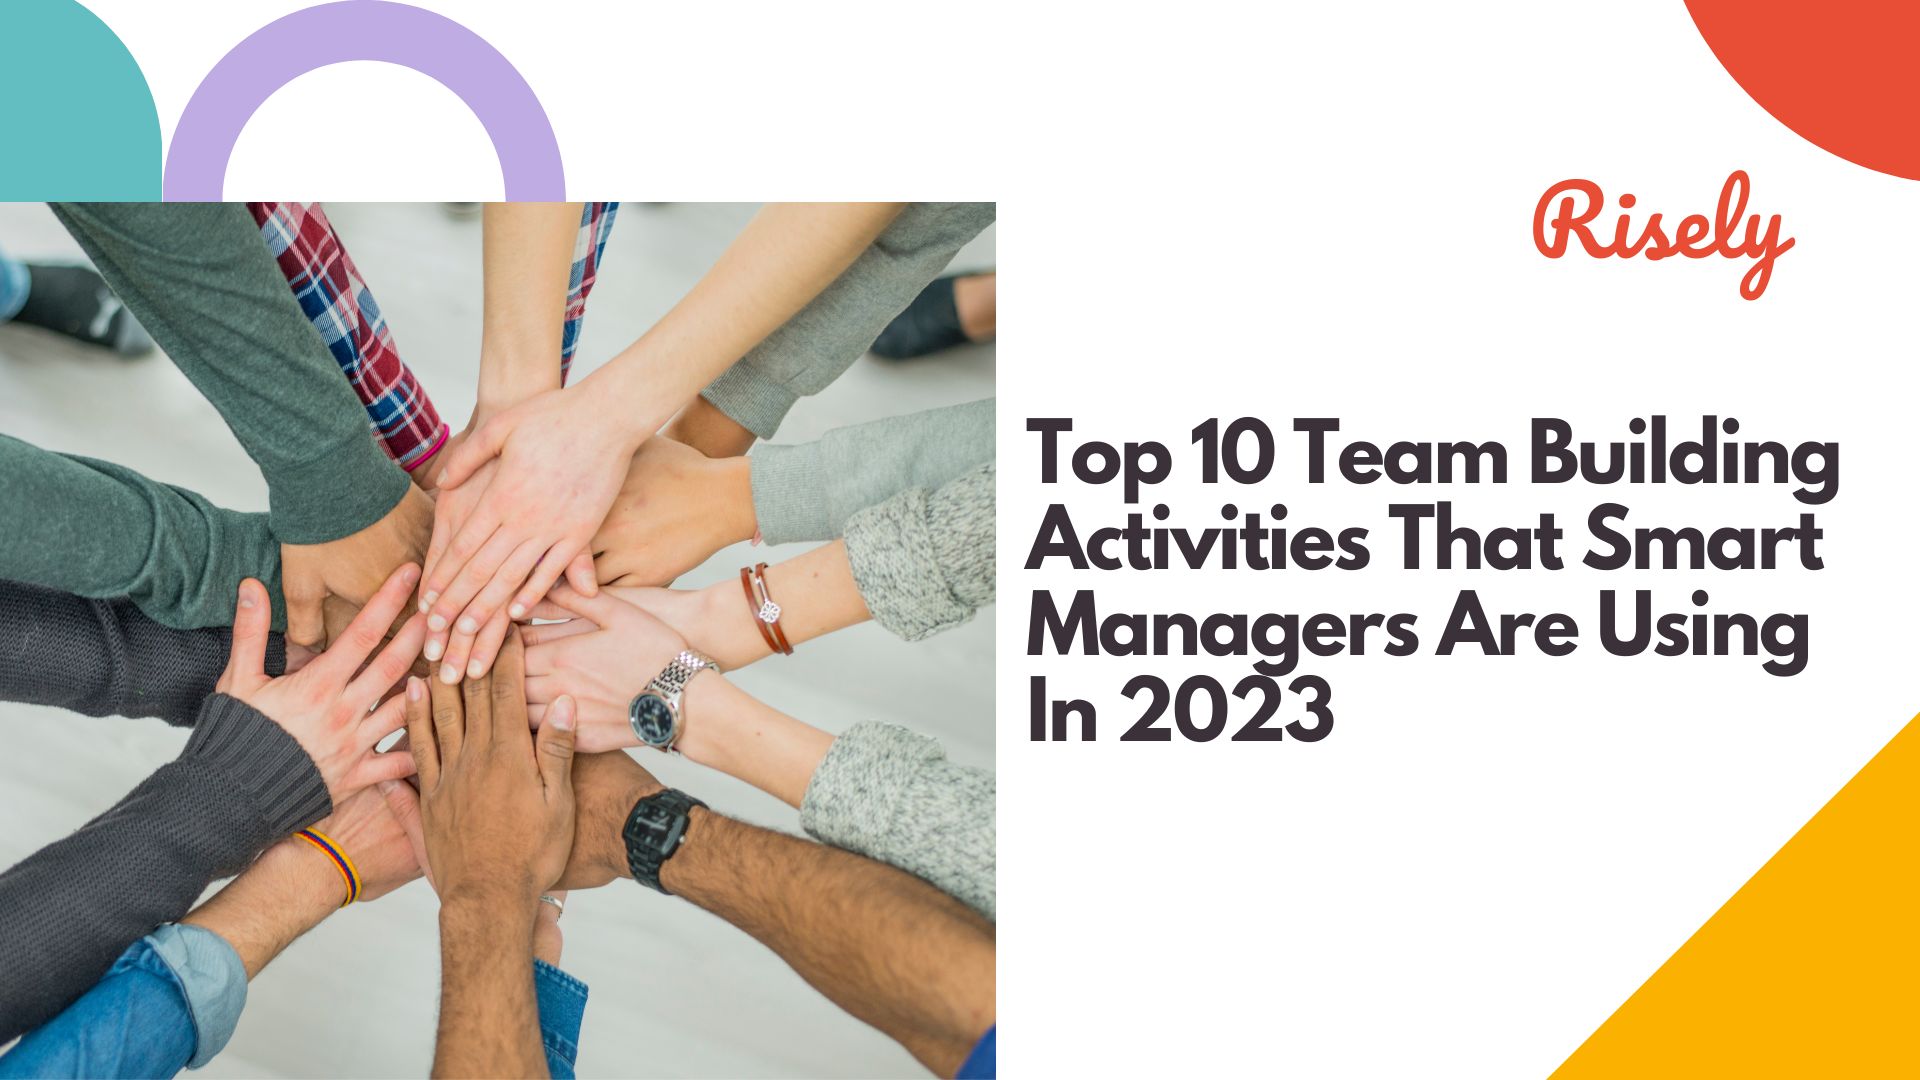 Top 10 Team Building Activities That Smart Managers Are Using In 2023